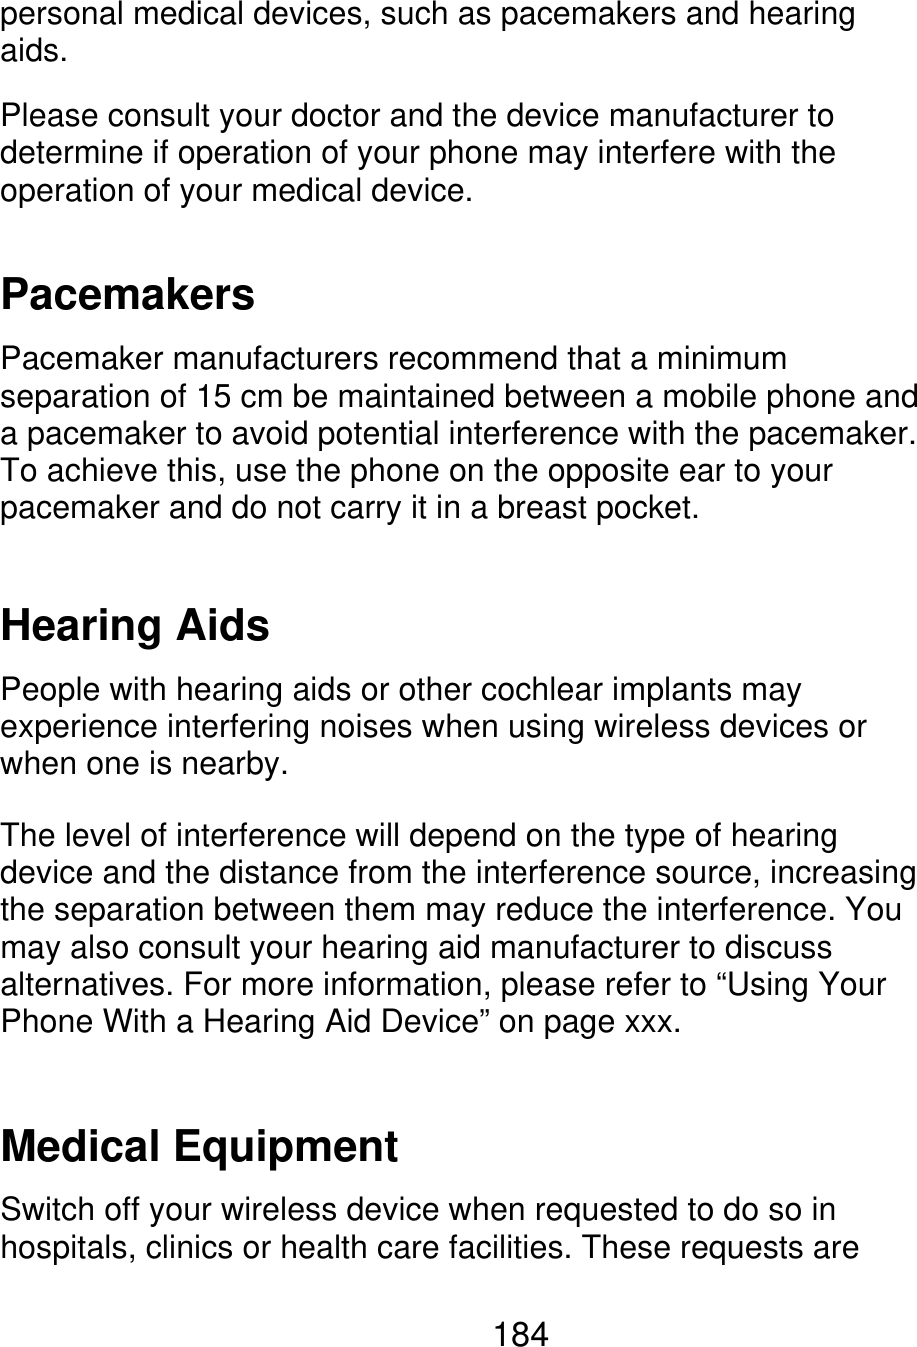 personal medical devices, such as pacemakers and hearing aids. Please consult your doctor and the device manufacturer to determine if operation of your phone may interfere with the operation of your medical device. Pacemakers Pacemaker manufacturers recommend that a minimum separation of 15 cm be maintained between a mobile phone and a pacemaker to avoid potential interference with the pacemaker. To achieve this, use the phone on the opposite ear to your pacemaker and do not carry it in a breast pocket. Hearing Aids People with hearing aids or other cochlear implants may experience interfering noises when using wireless devices or when one is nearby. The level of interference will depend on the type of hearing device and the distance from the interference source, increasing the separation between them may reduce the interference. You may also consult your hearing aid manufacturer to discuss alternatives. For more information, please refer to “Using Your Phone With a Hearing Aid Device” on page xxx. Medical Equipment Switch off your wireless device when requested to do so in hospitals, clinics or health care facilities. These requests are 184 